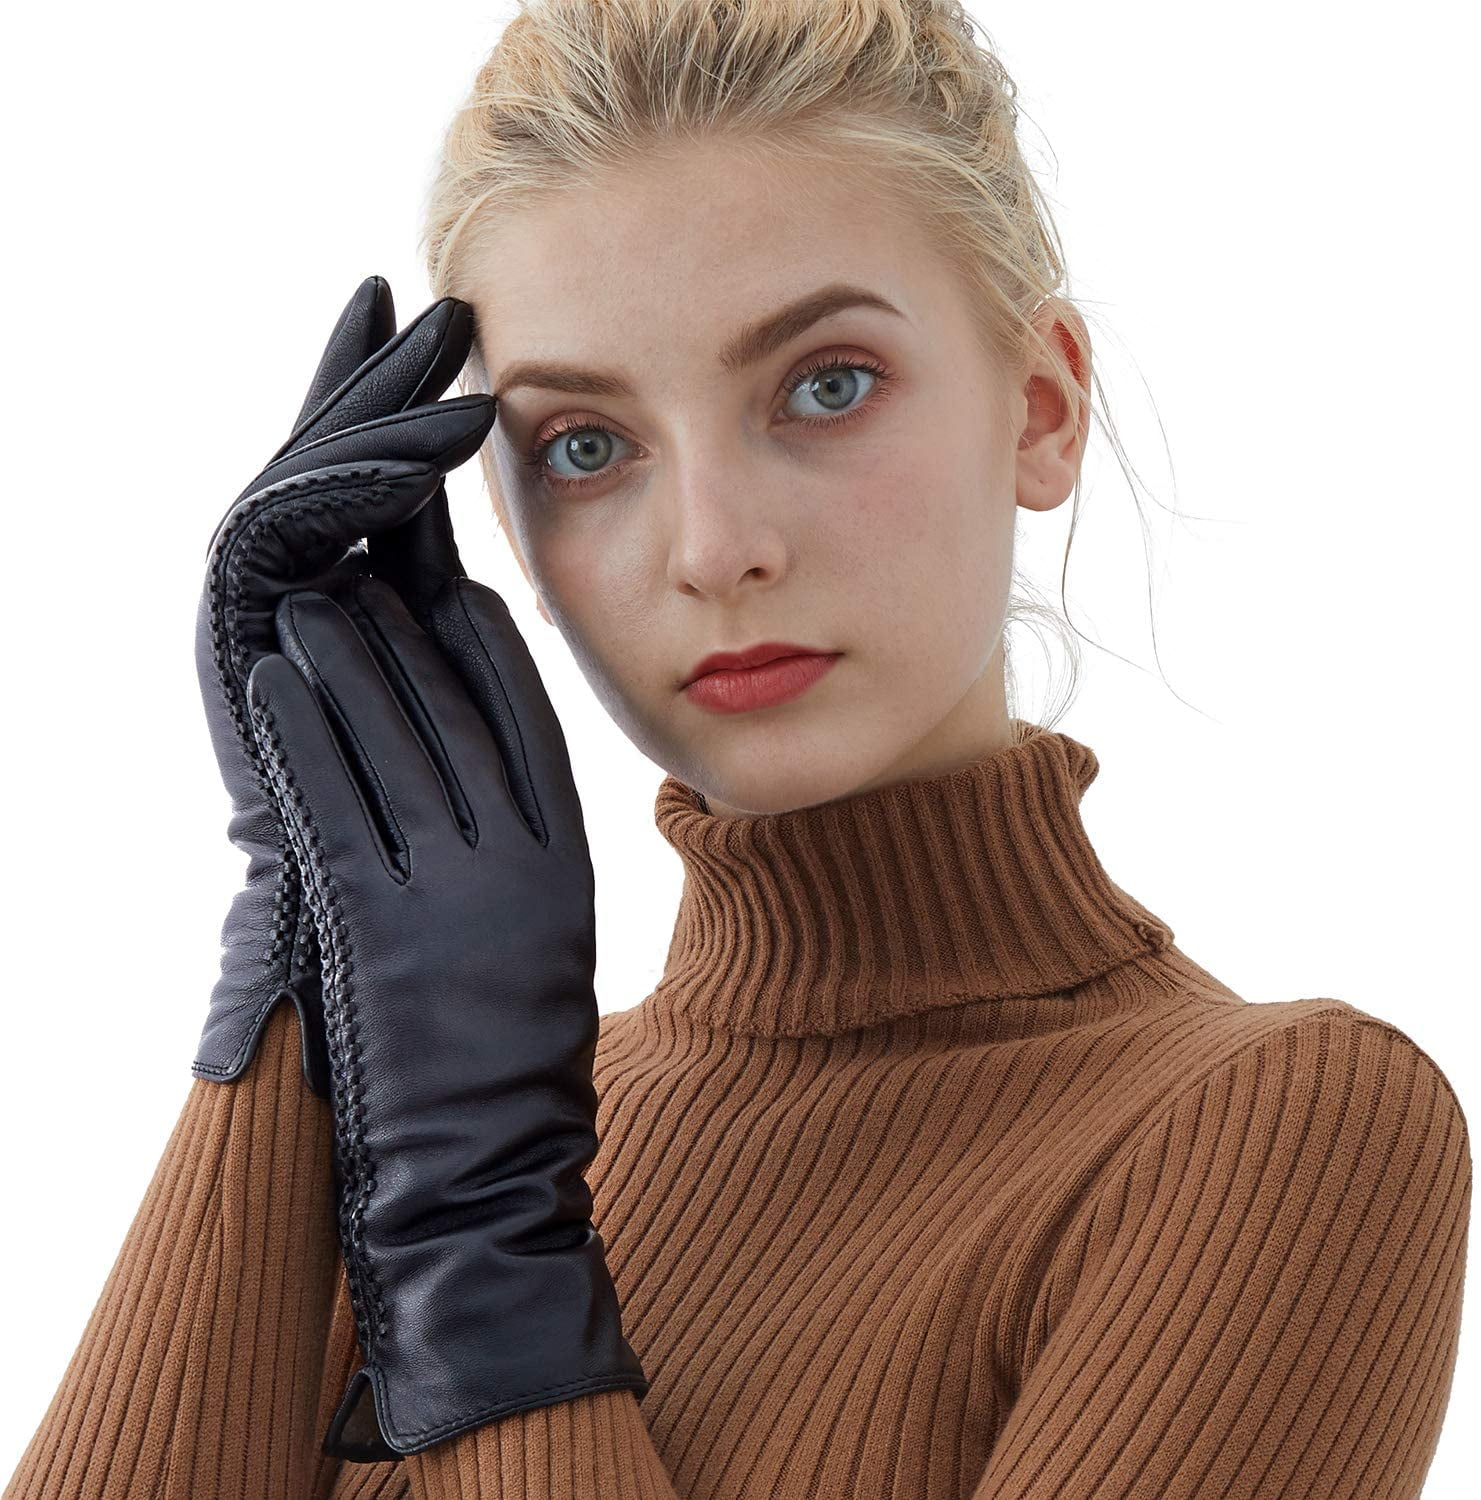 20FW Logo Sheepskin Thin Waterproof Gloves High Grade Leather For Men And  Women, Warm And Durable For Outdoor Driving And Riding, With Packaging  Included From Ball2006, $78.08